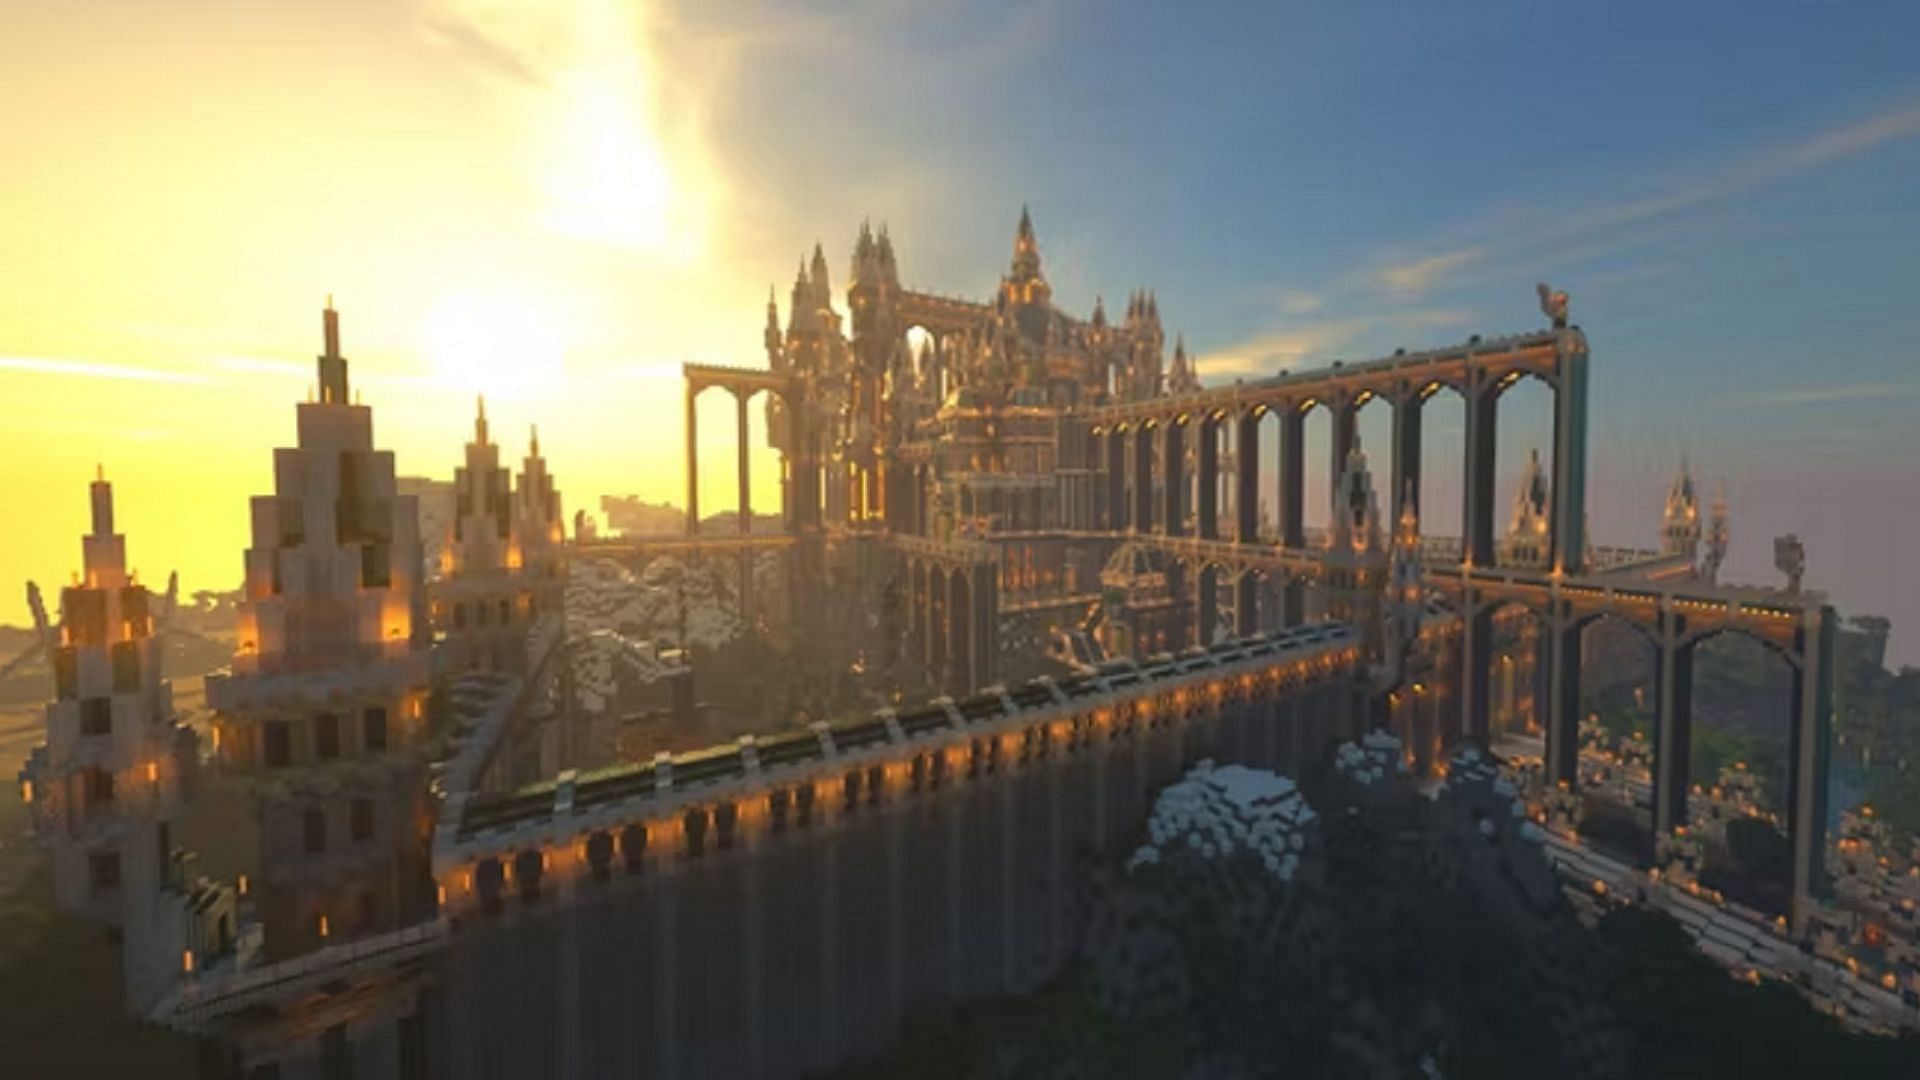 A massive castle for Minecraft players (Image via u/151owners/Reddit)